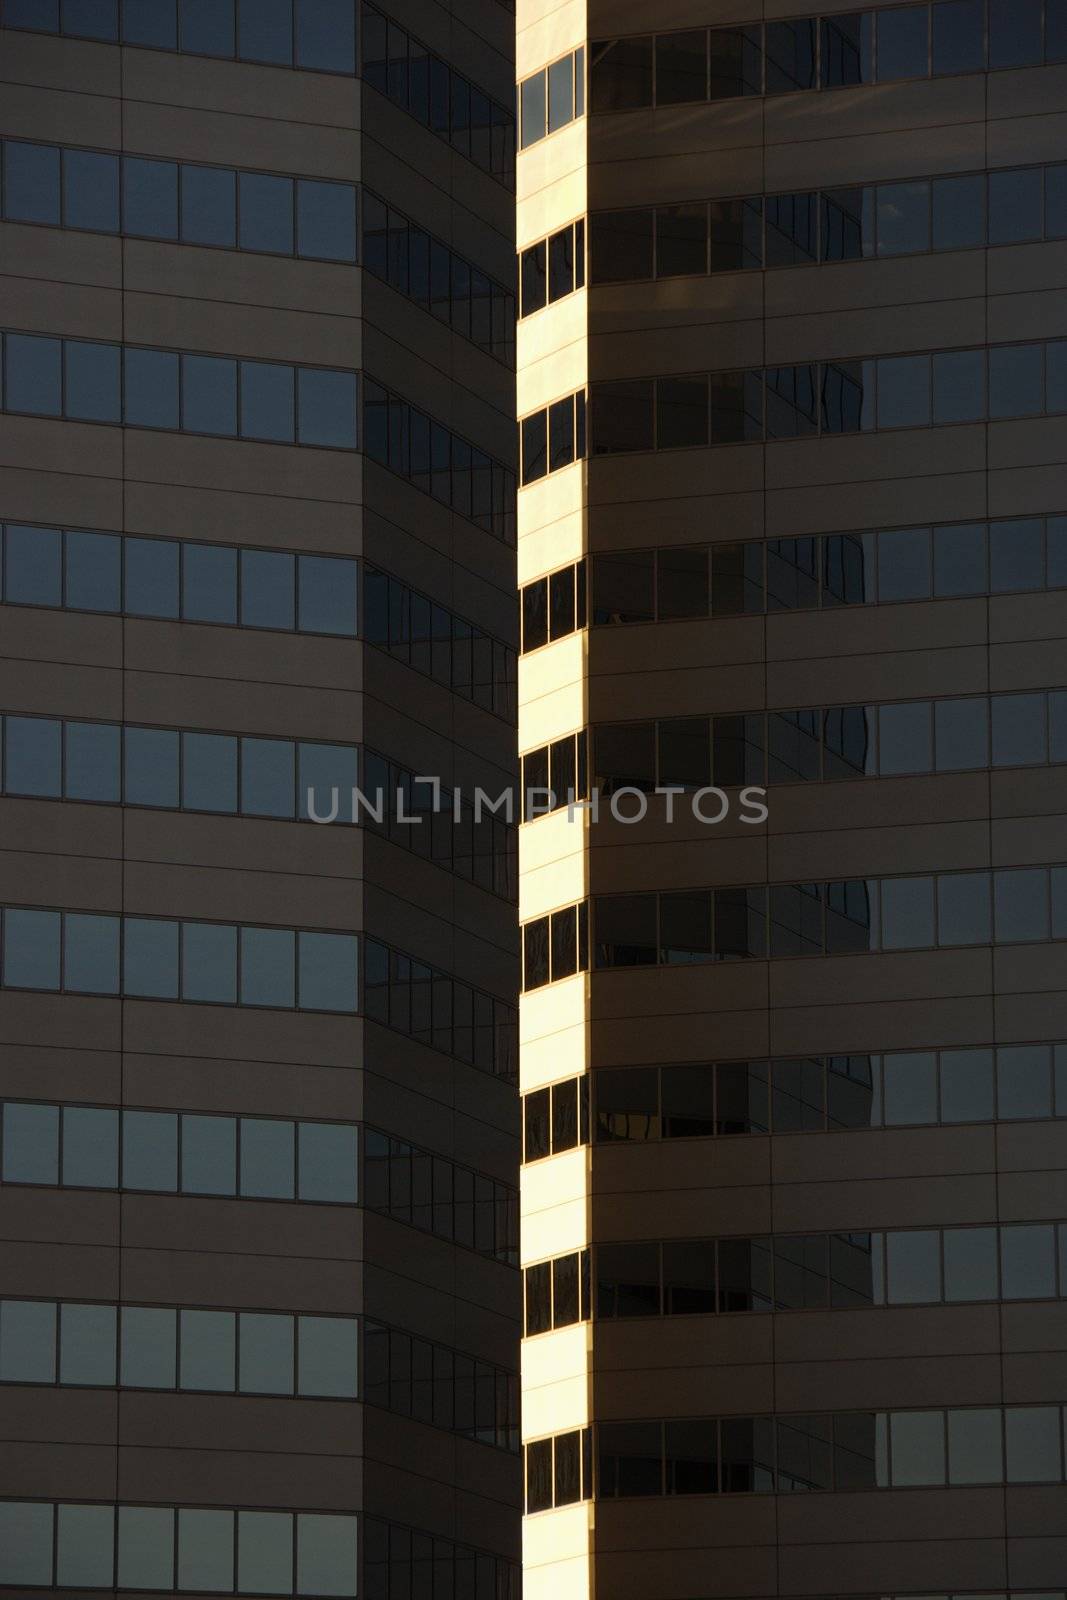 Side exterior of urban skyscraper building with light reflecting off windows.